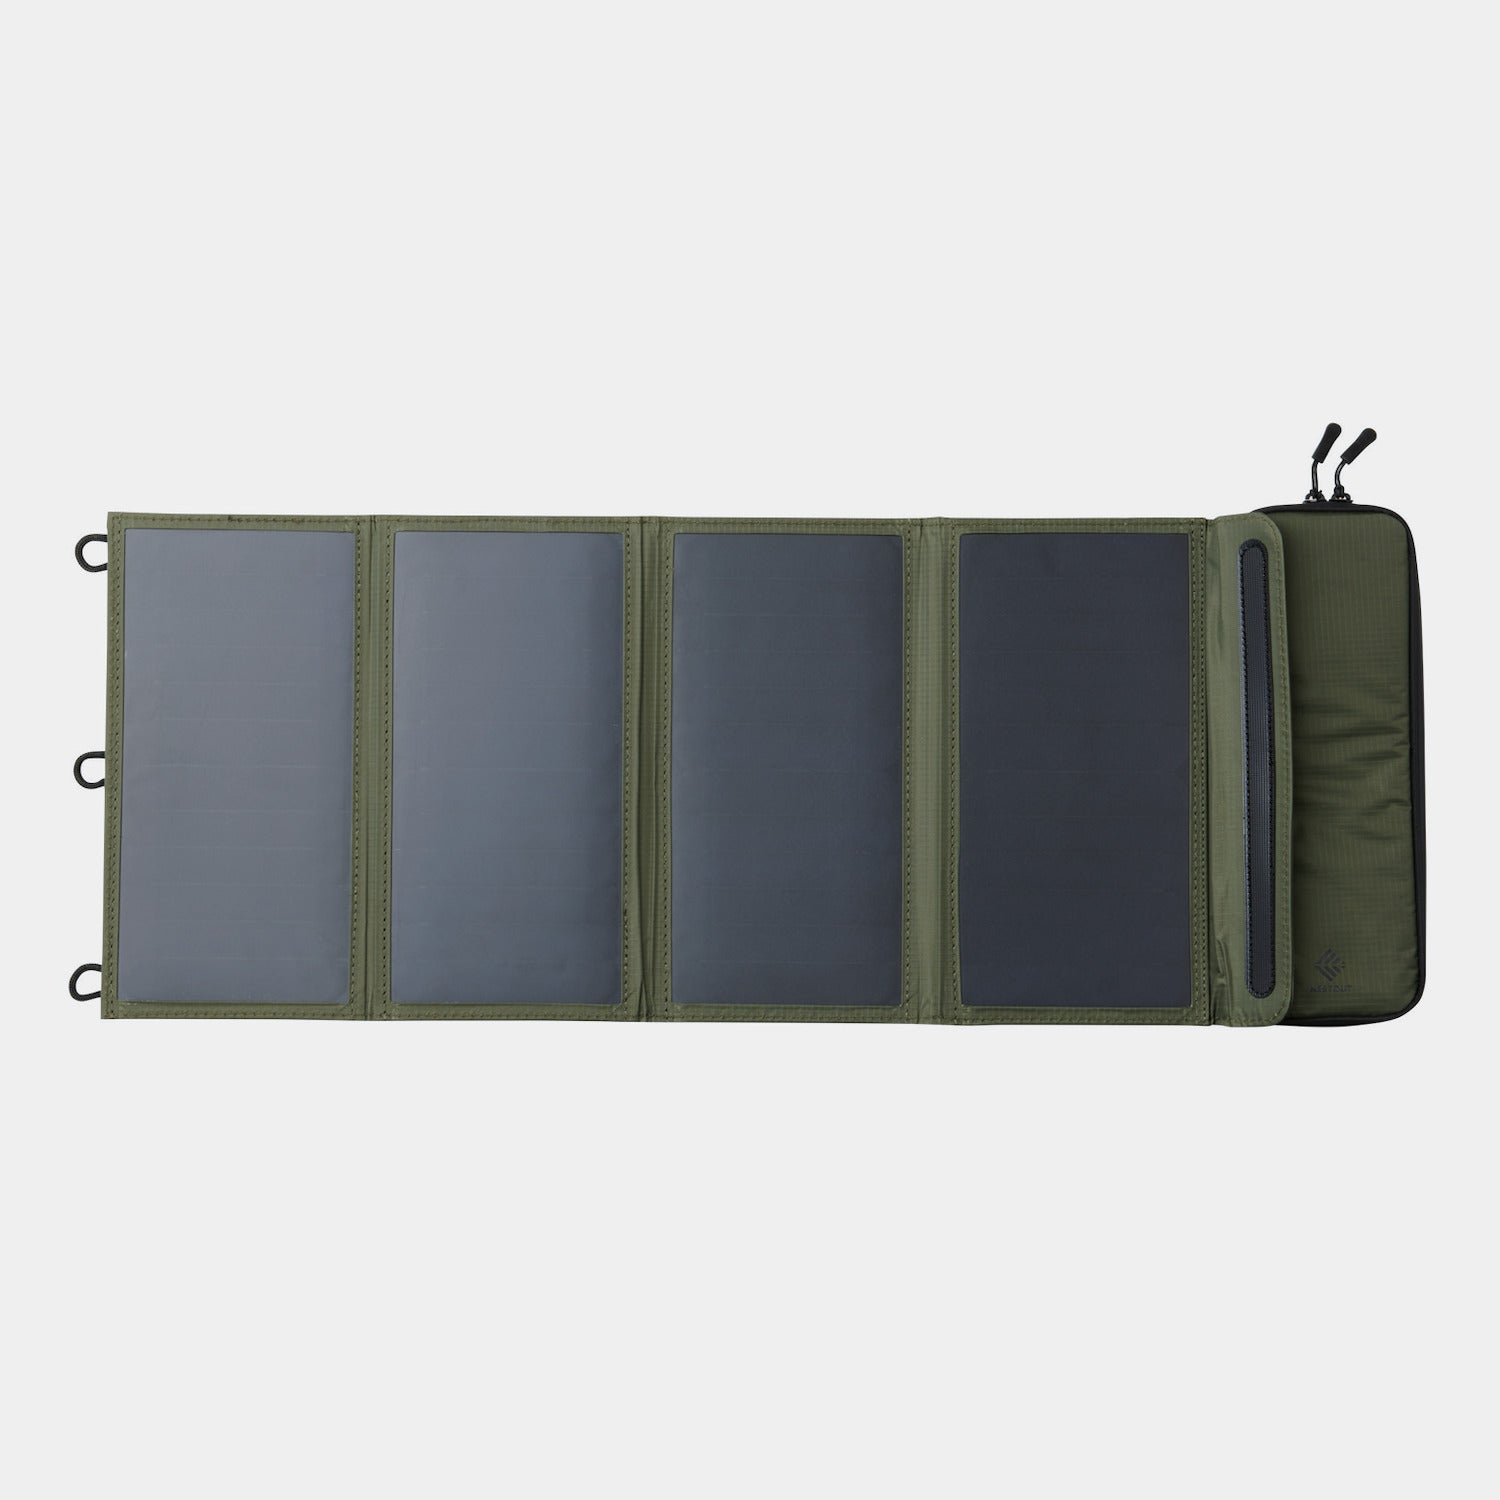 Outdoor Solar Charger - 4 Panels